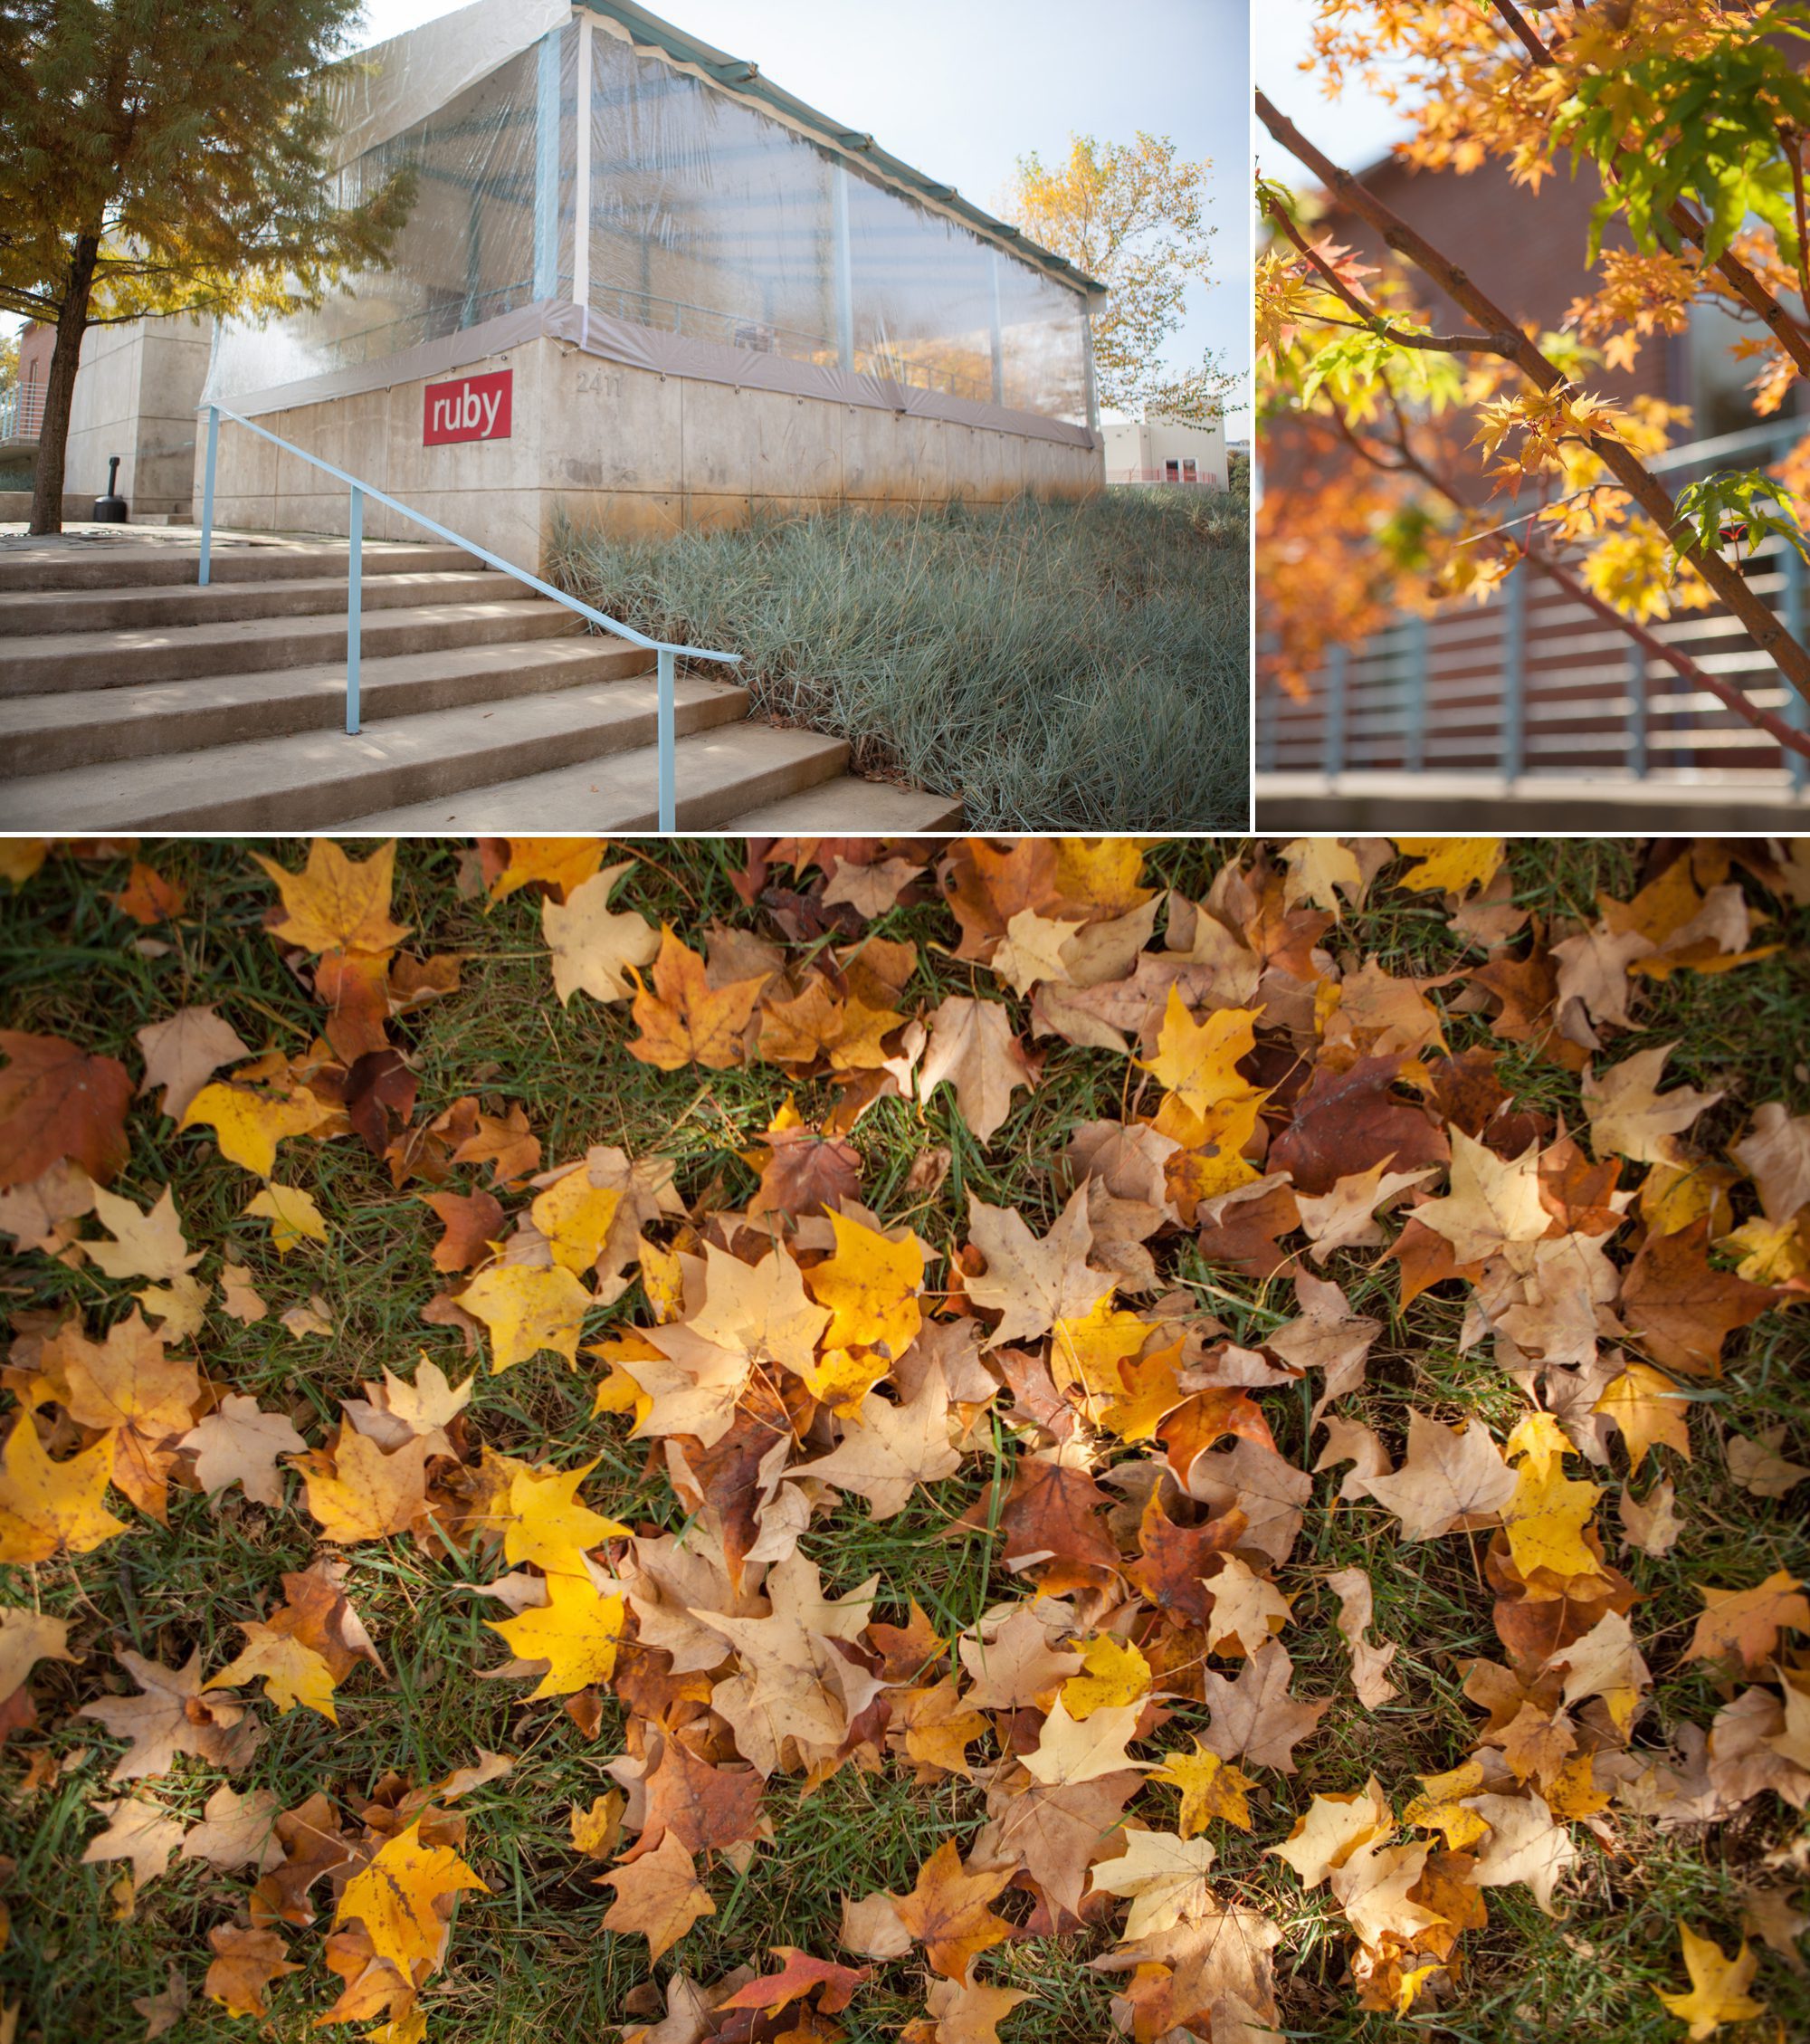 Fall colors at wedding venue at Ruby, Nashville TN. Wedding photography by Krista Lee, Krista Lee Photography Franklin TN